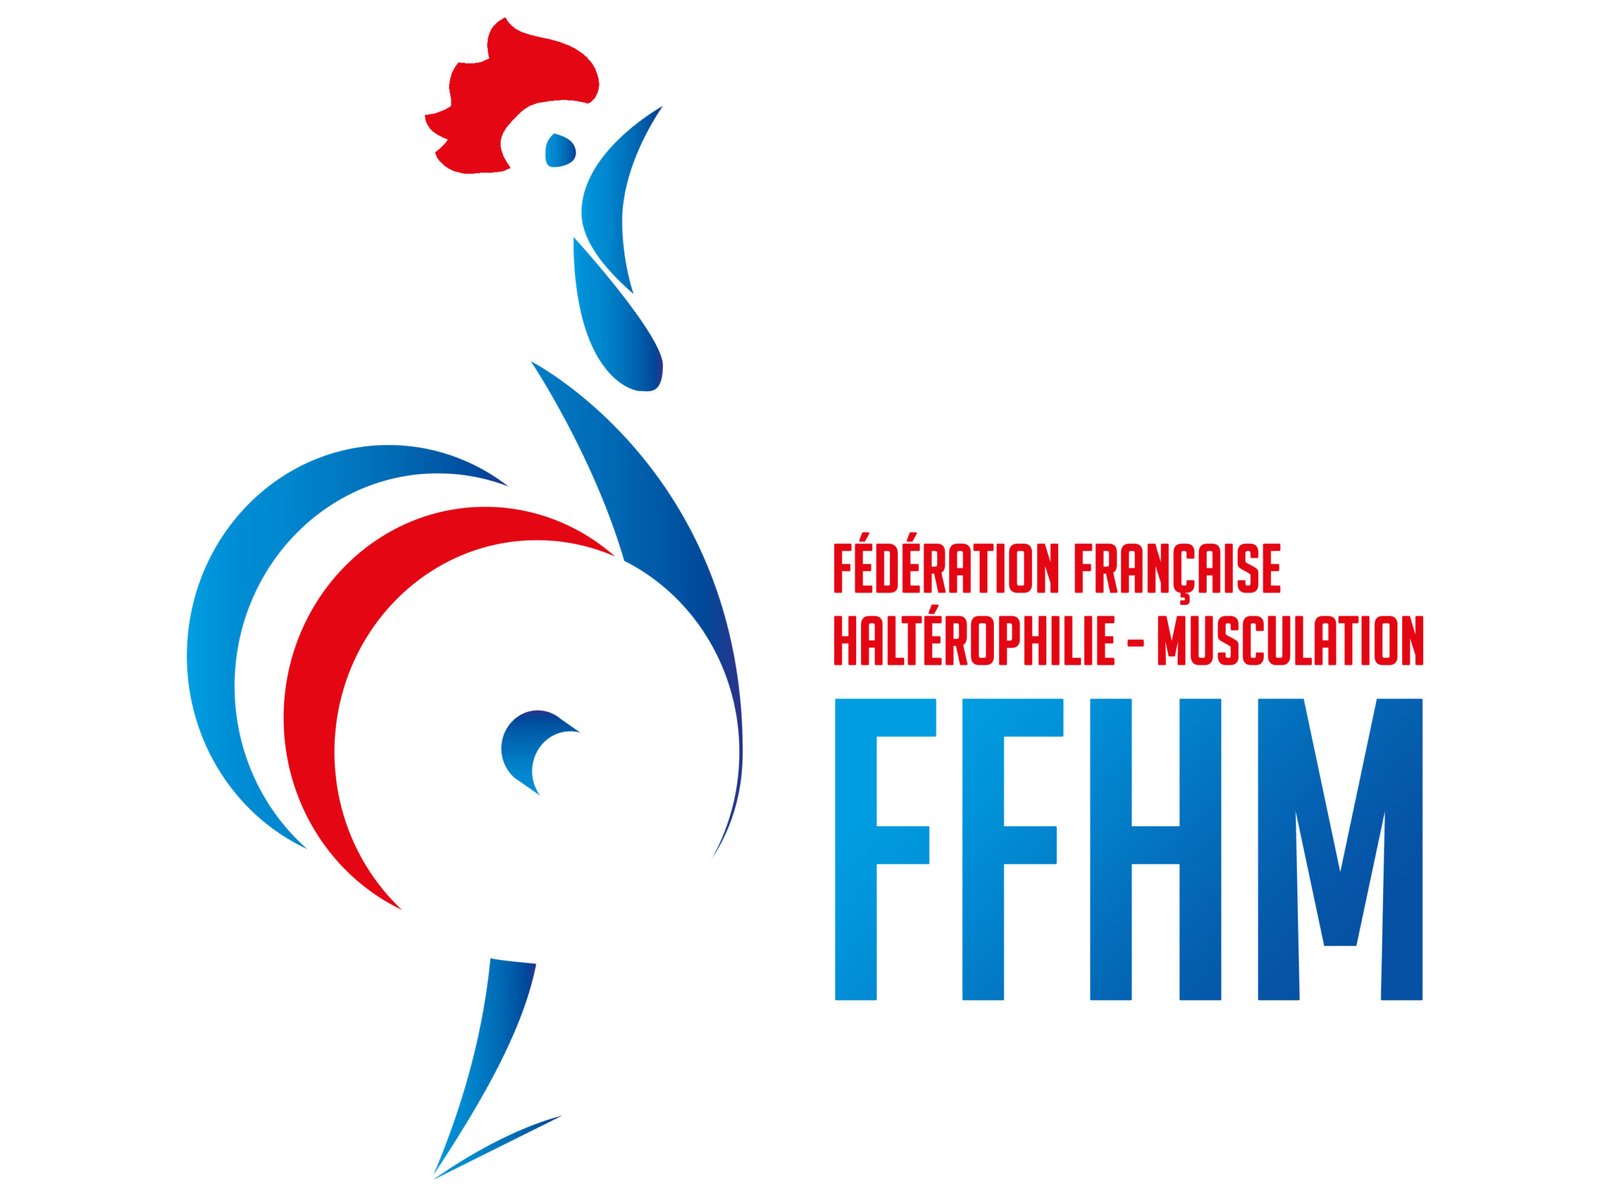 Fédération Française haltérophilie musculation (FFHM) - the governing body for Olympic weightlifting in France, responsible for results, rankings, and doping sanctions.